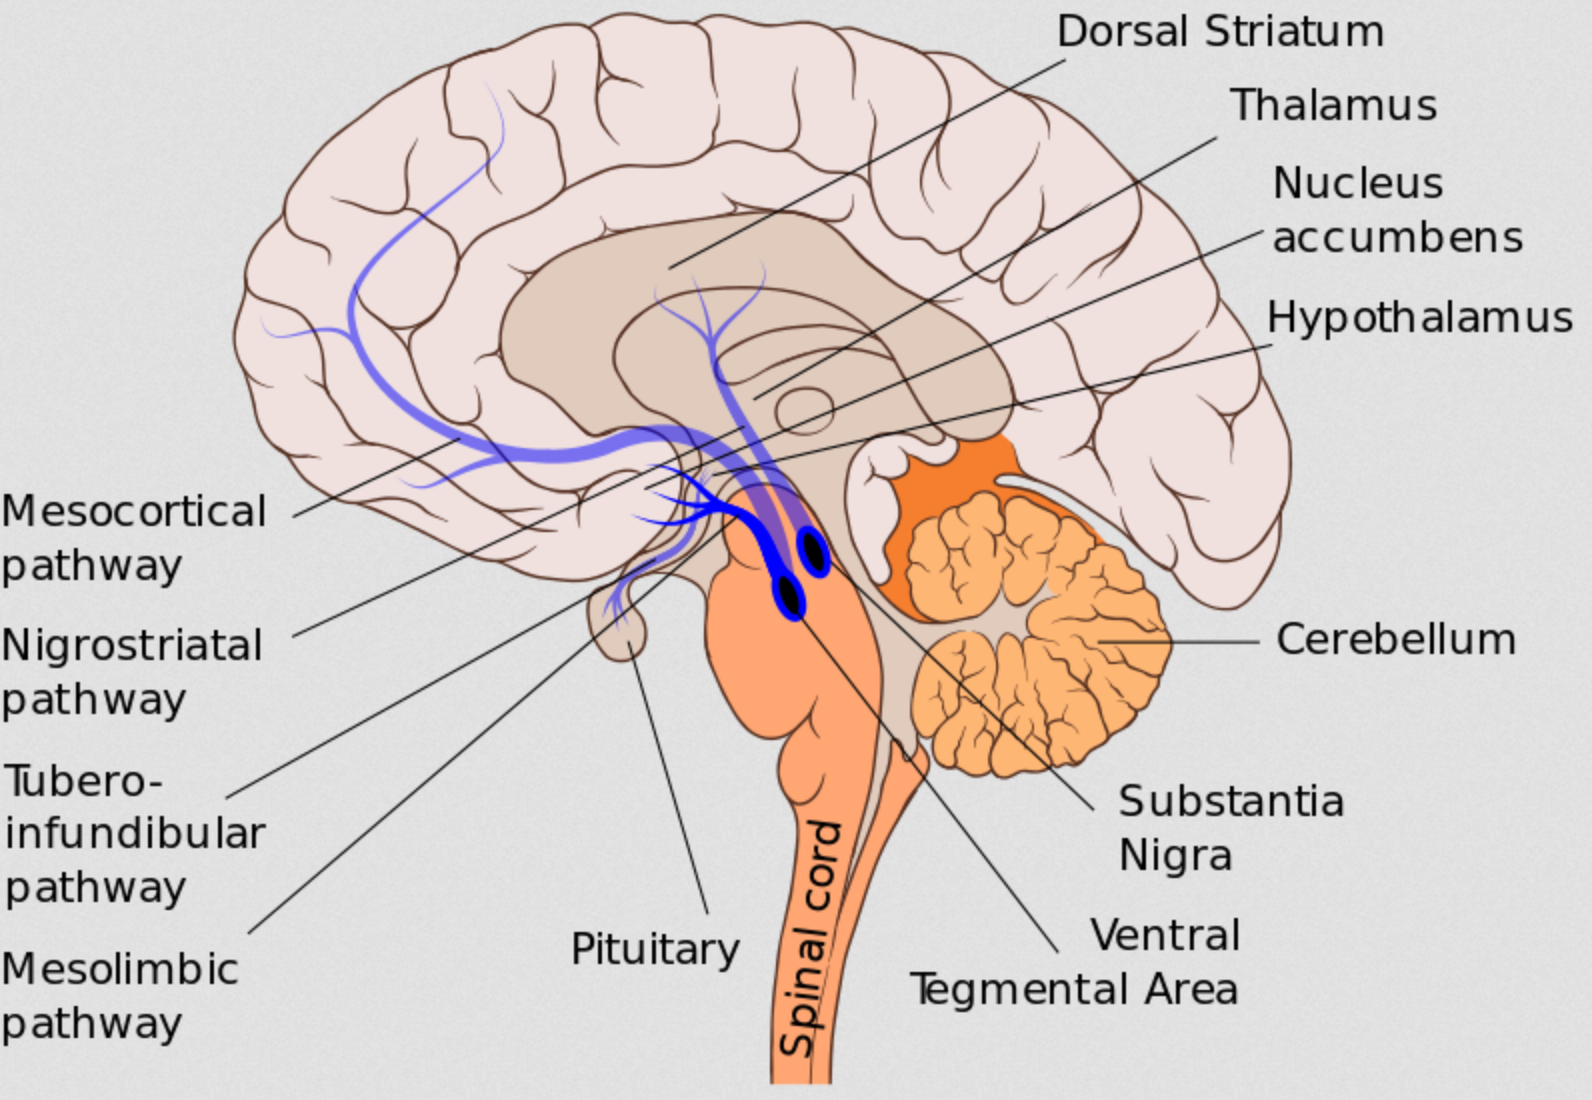 Chronic Pain Linked to Brain Signals in Orbitofrontal Cortex - The